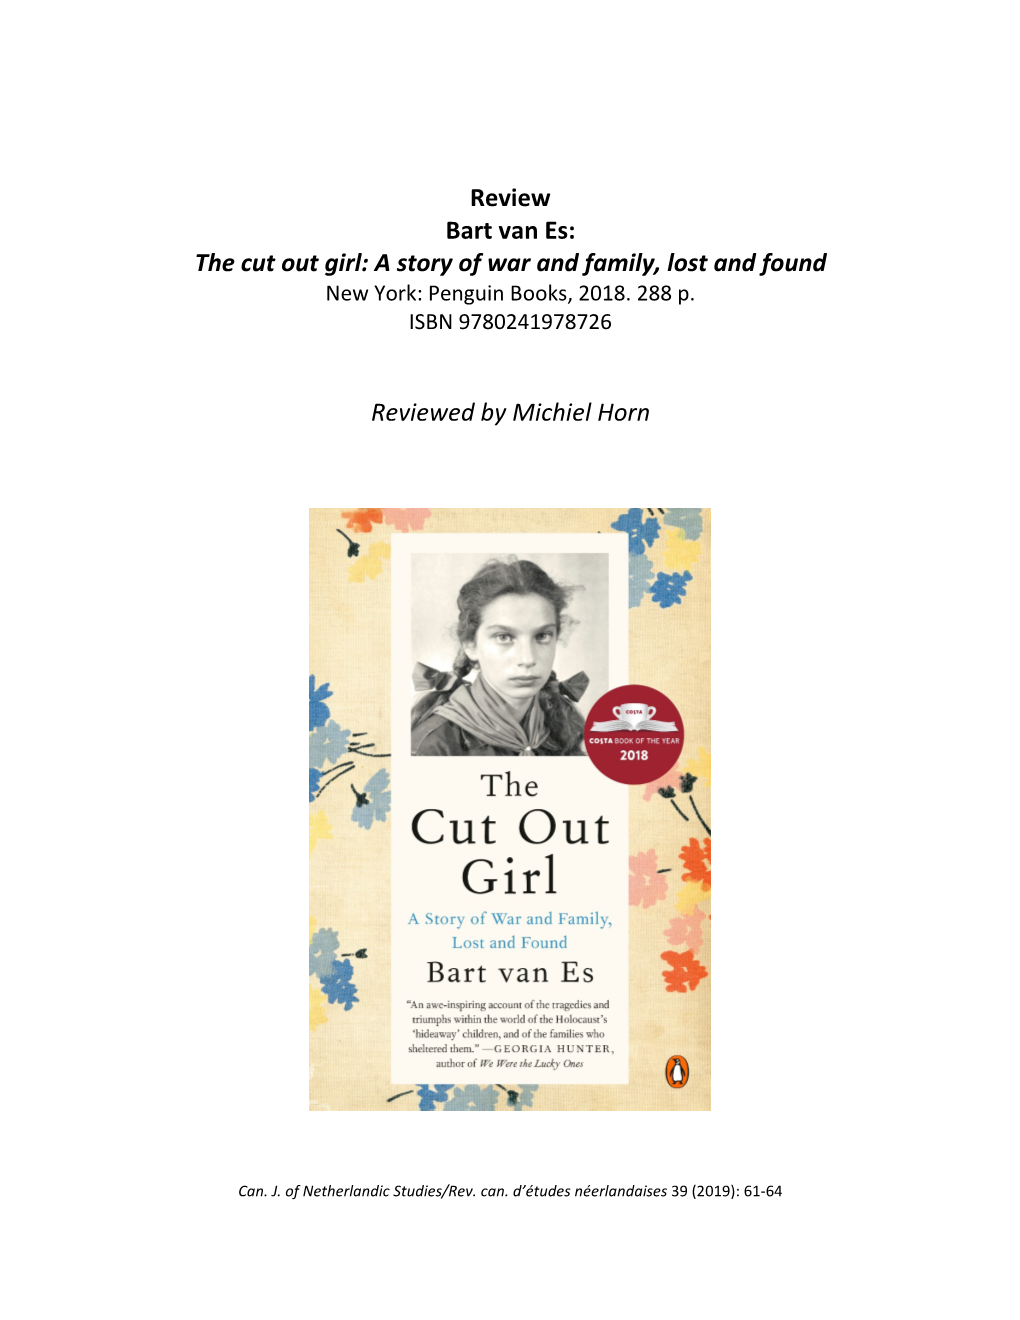 Bart Van Es: the Cut out Girl: a Story of War and Family, Lost and Found New York: Penguin Books, 2018